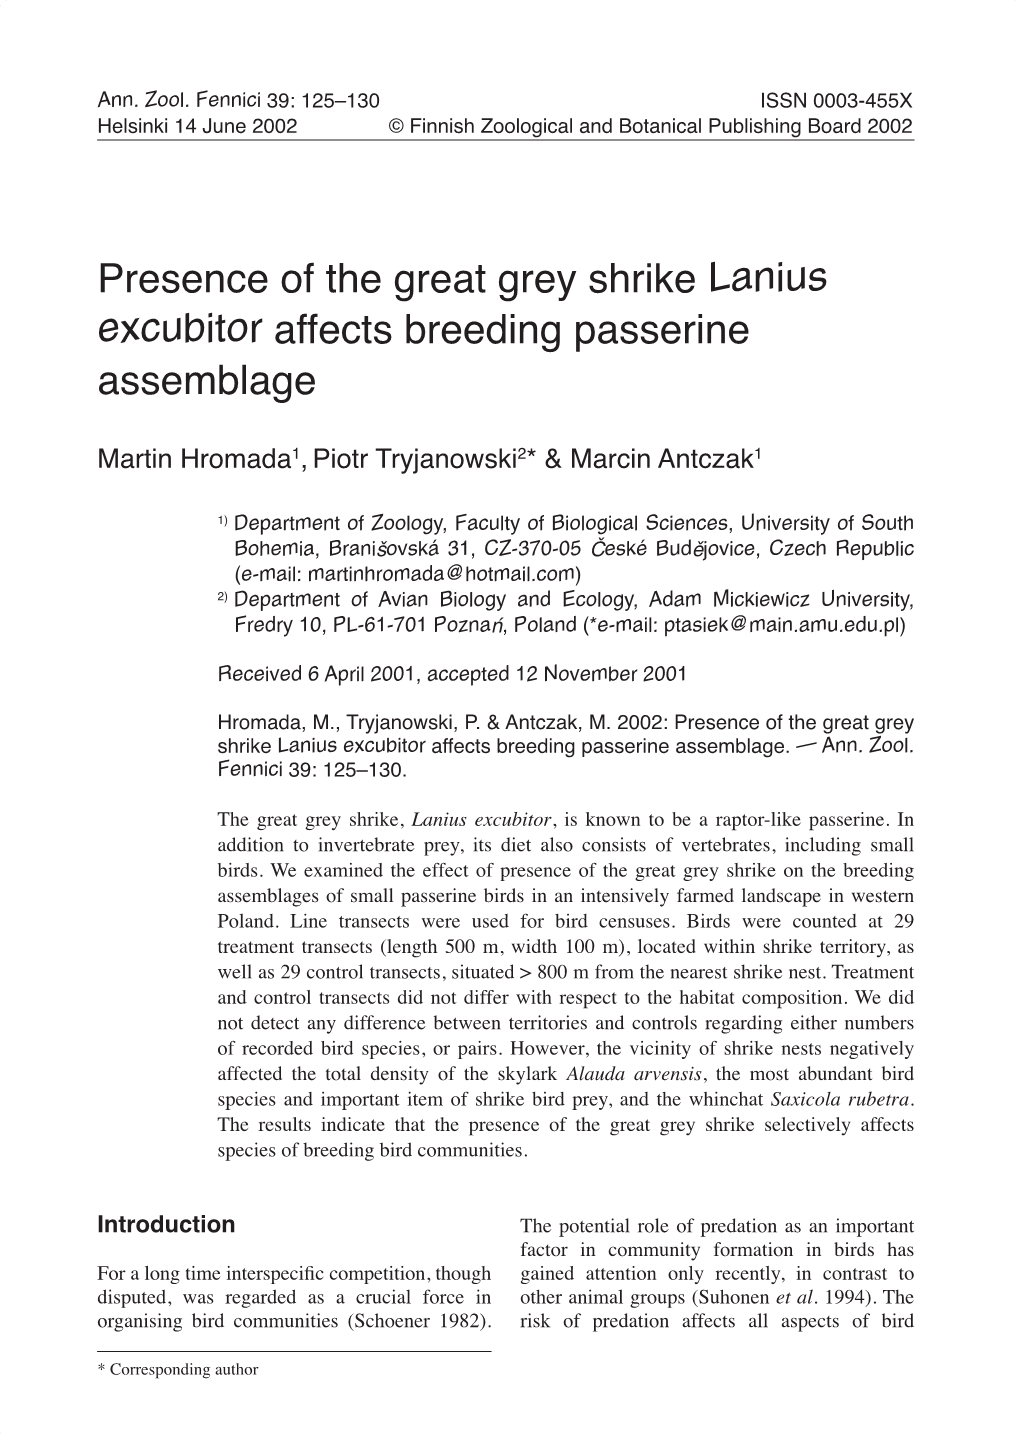 Presence of the Great Grey Shrike Lanius Excubitor Affects Breeding Passerine Assemblage